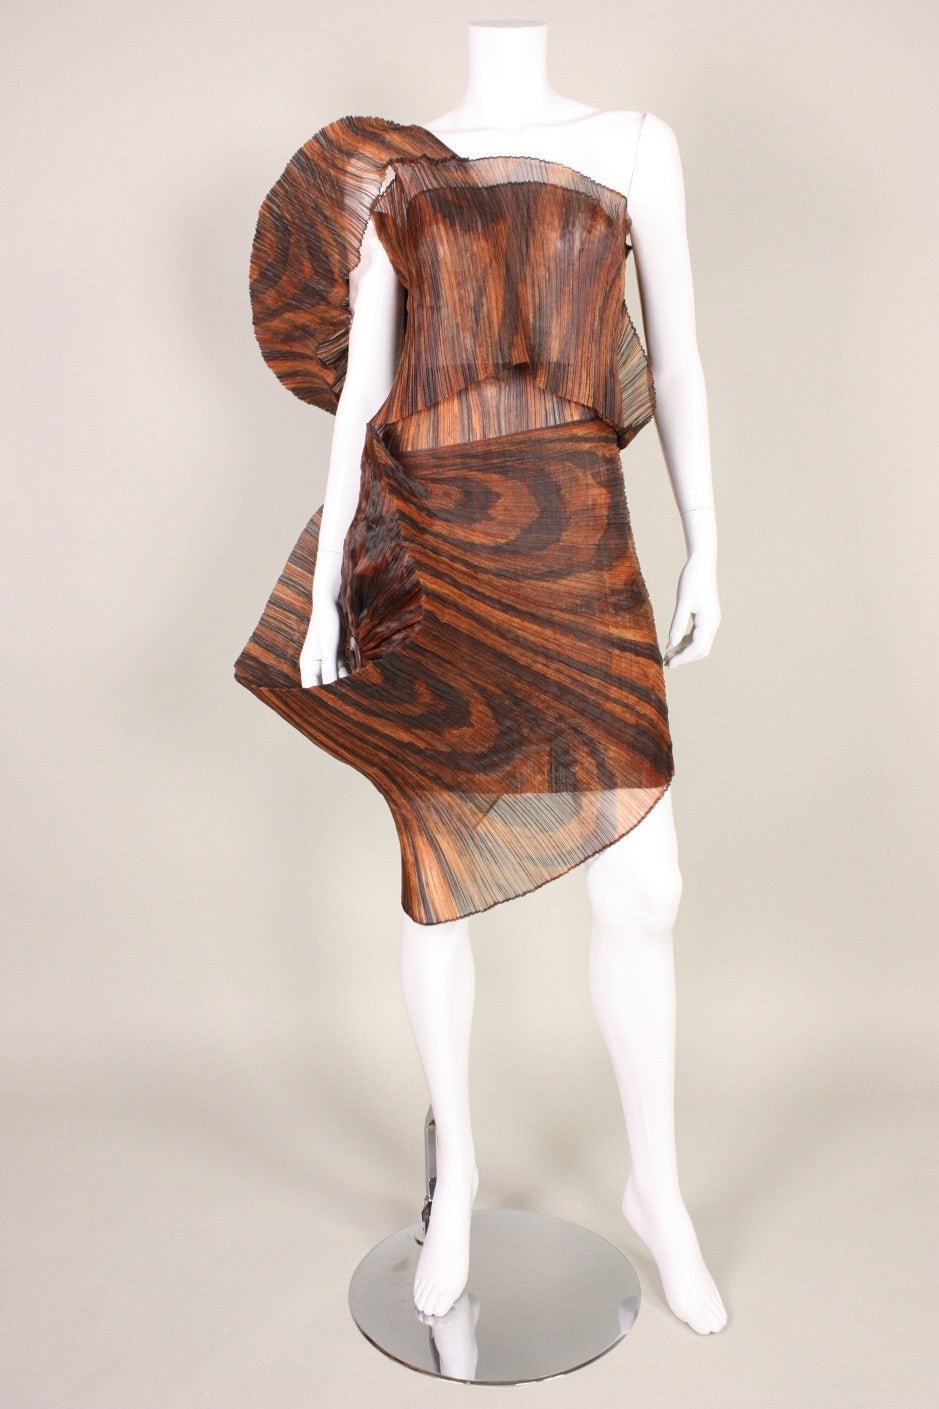 Vintage ensemble from Issey Miyake's Flower Pleats Series dates to his Spring/Summer 1990 collection.  It is made of 100% heat set polyester with a brown and black woodgrain print.  Large sculptural circular forms are created on blouse and skirt